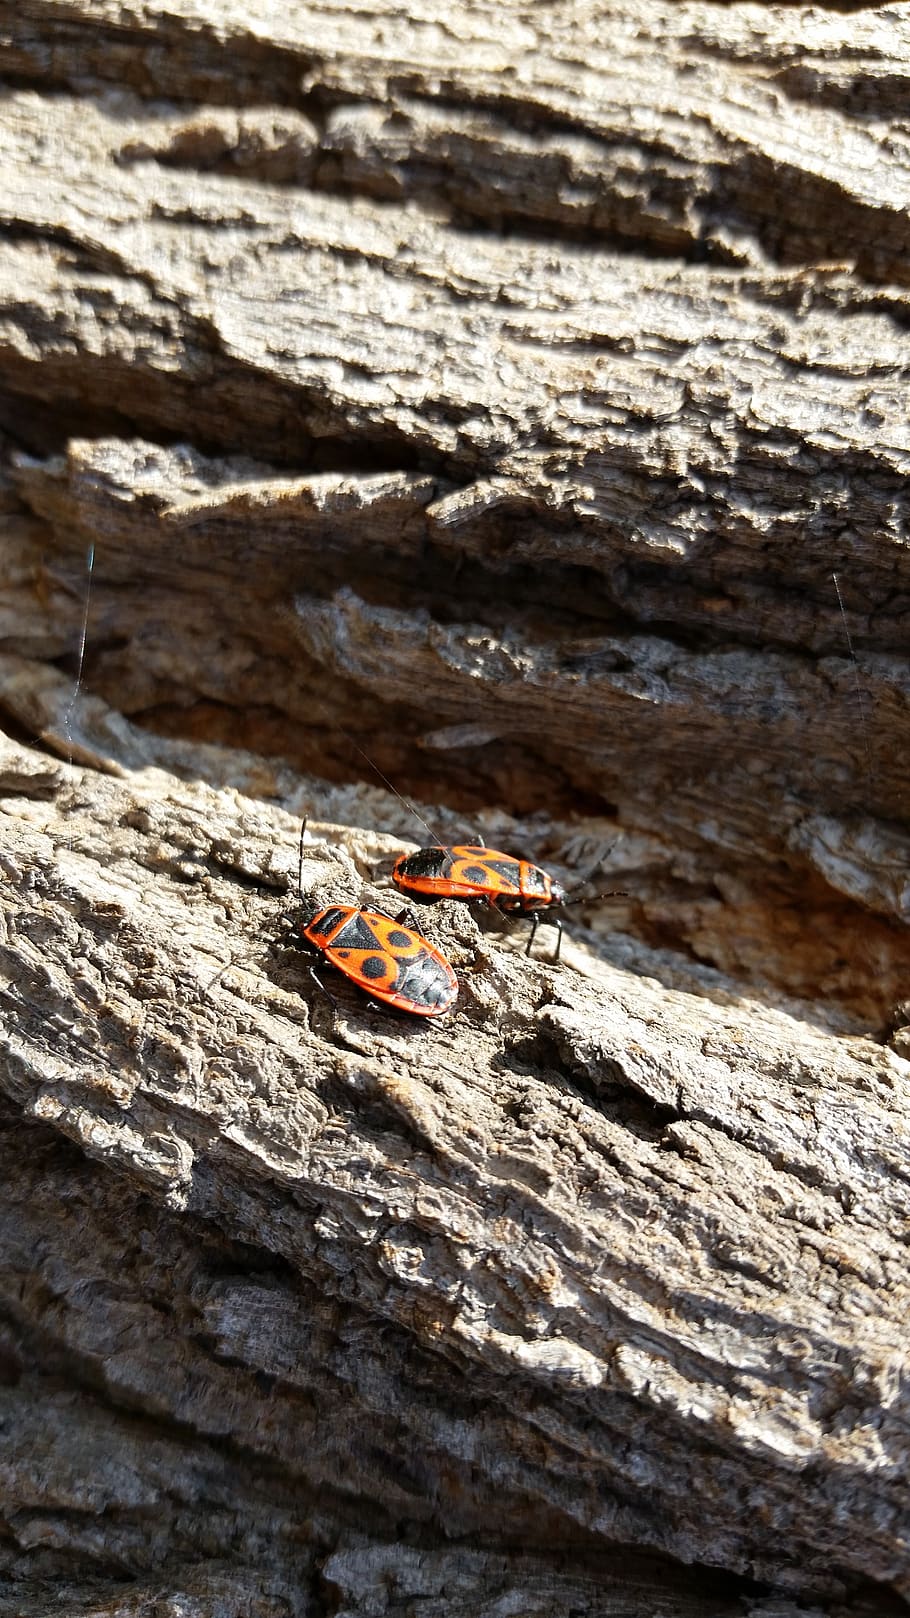 fire bug, insect, sunny, bark, outside, animal, nature, outdoors, summer, animals in the wild